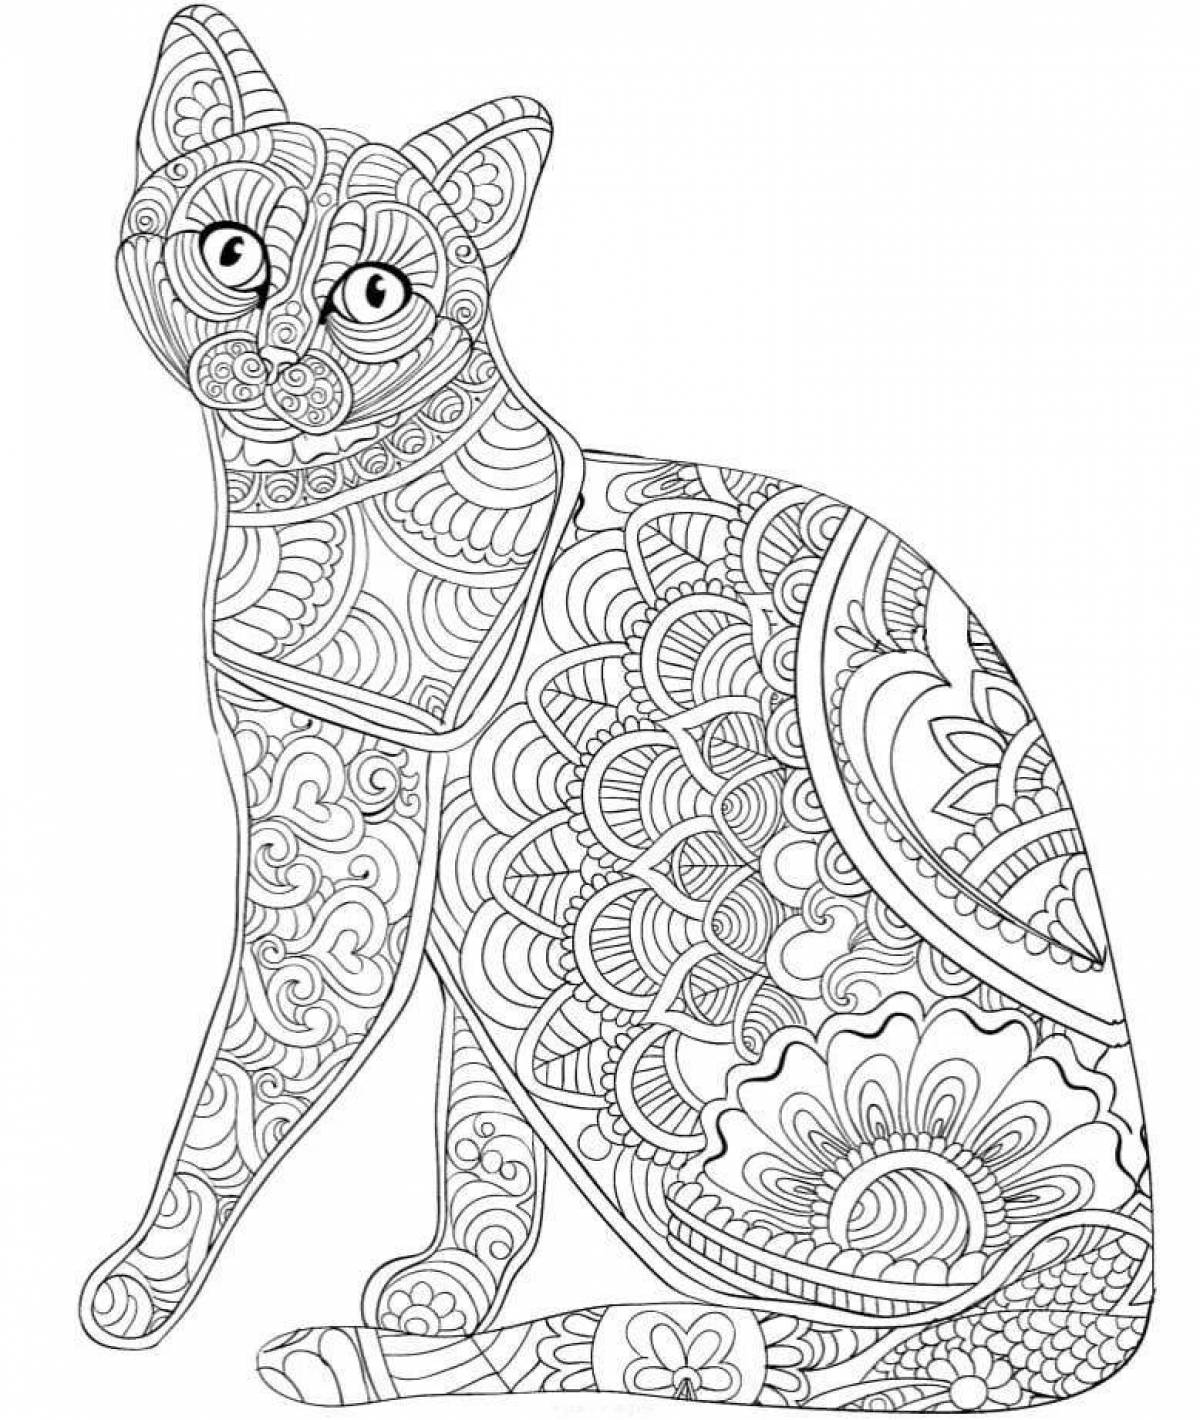 Radiant coloring page complex cat